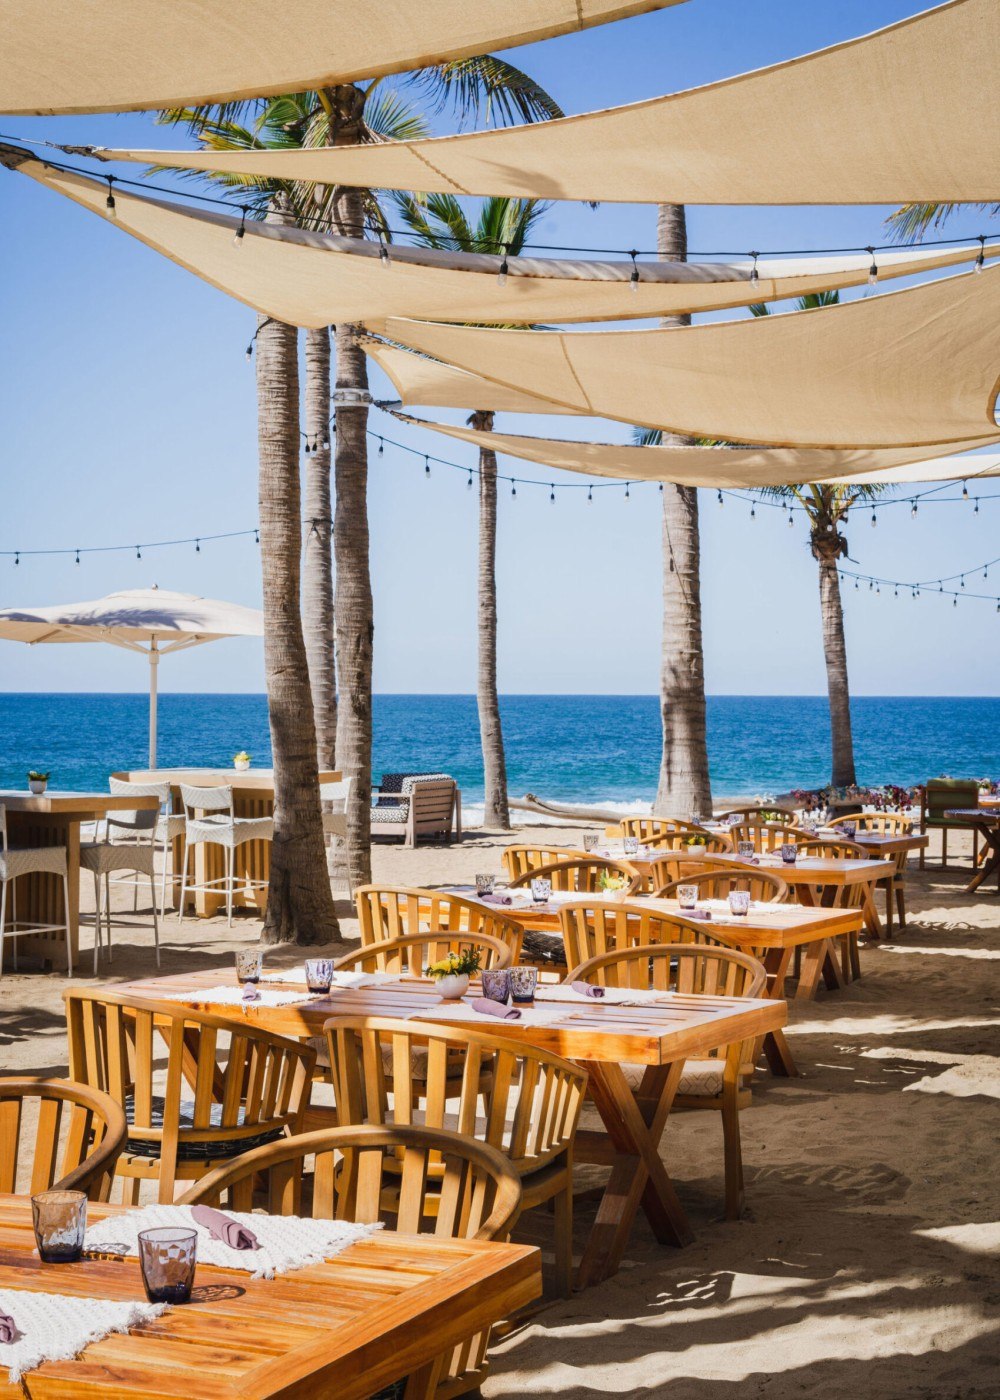 Picture of the dining tables on the beach